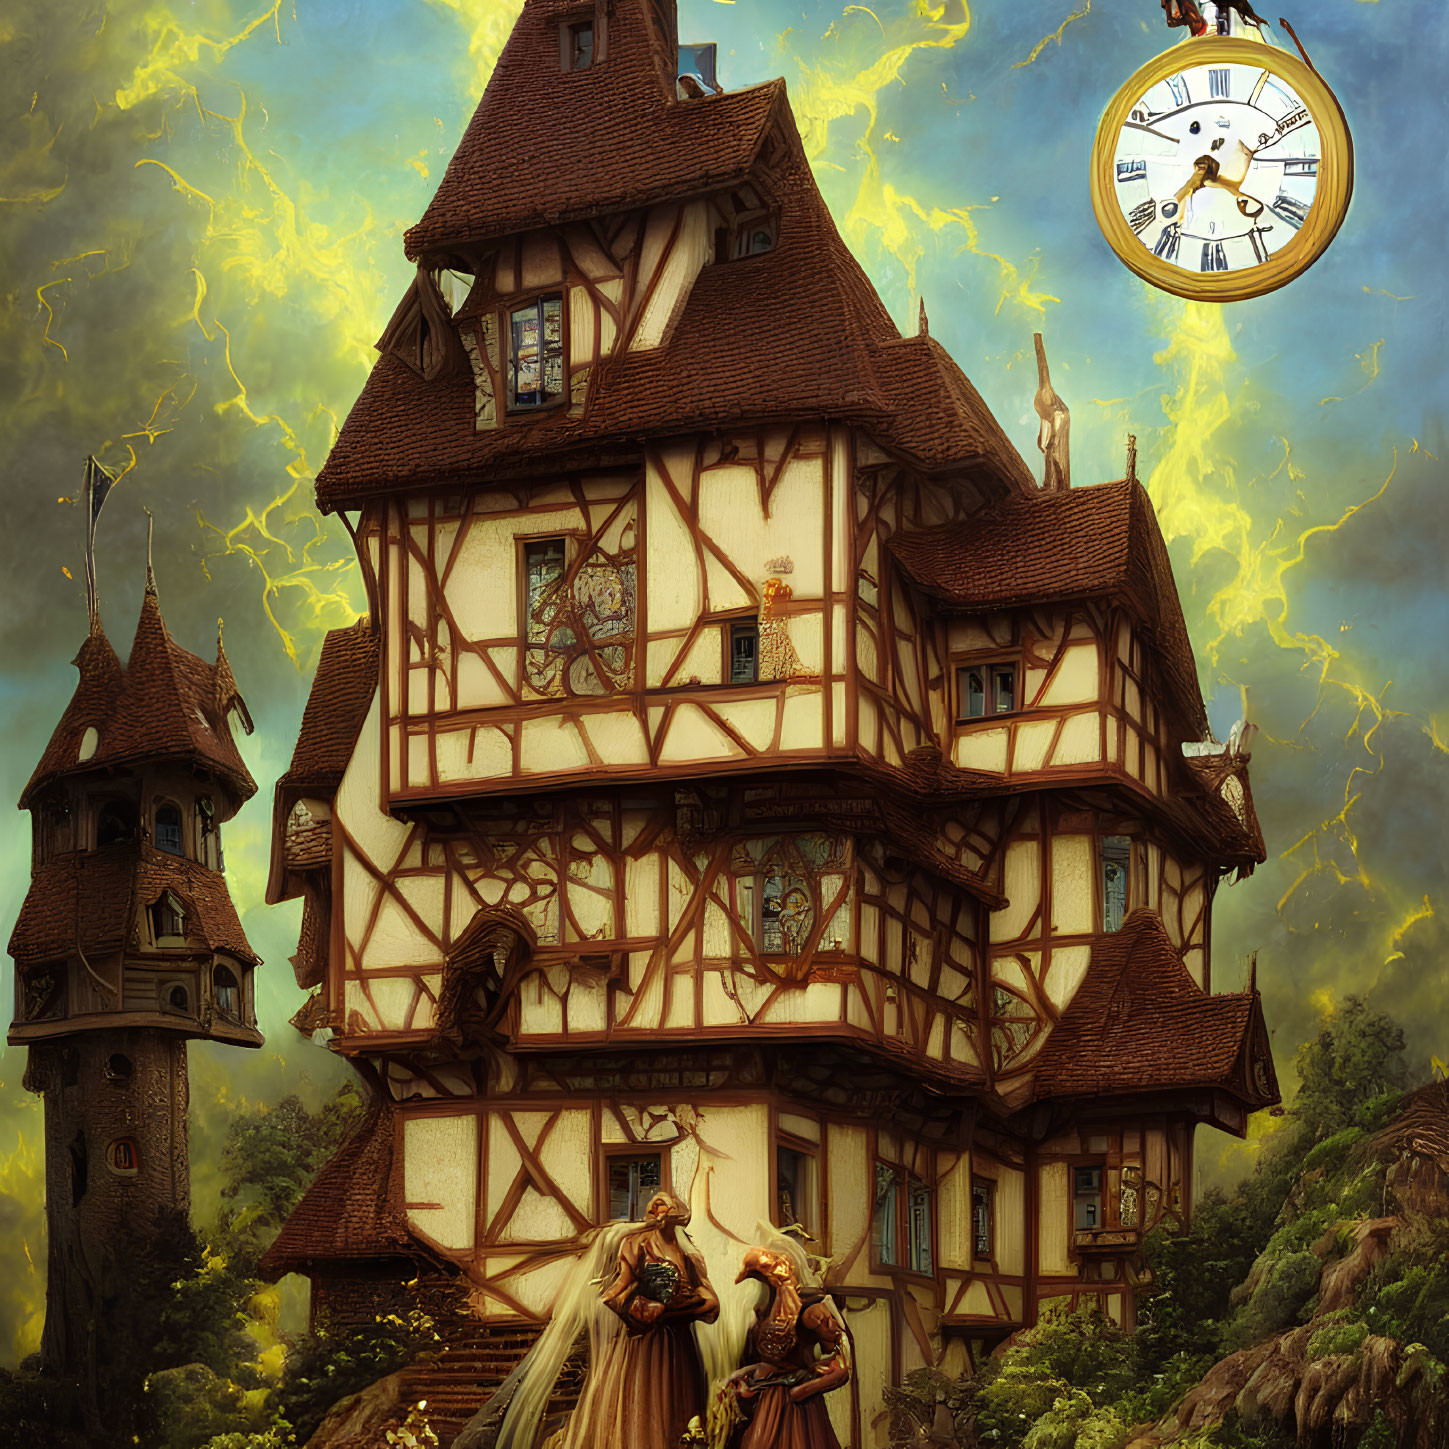 Medieval-style house with clock, prince and princess in embrace, surrounded by greenery and lightning